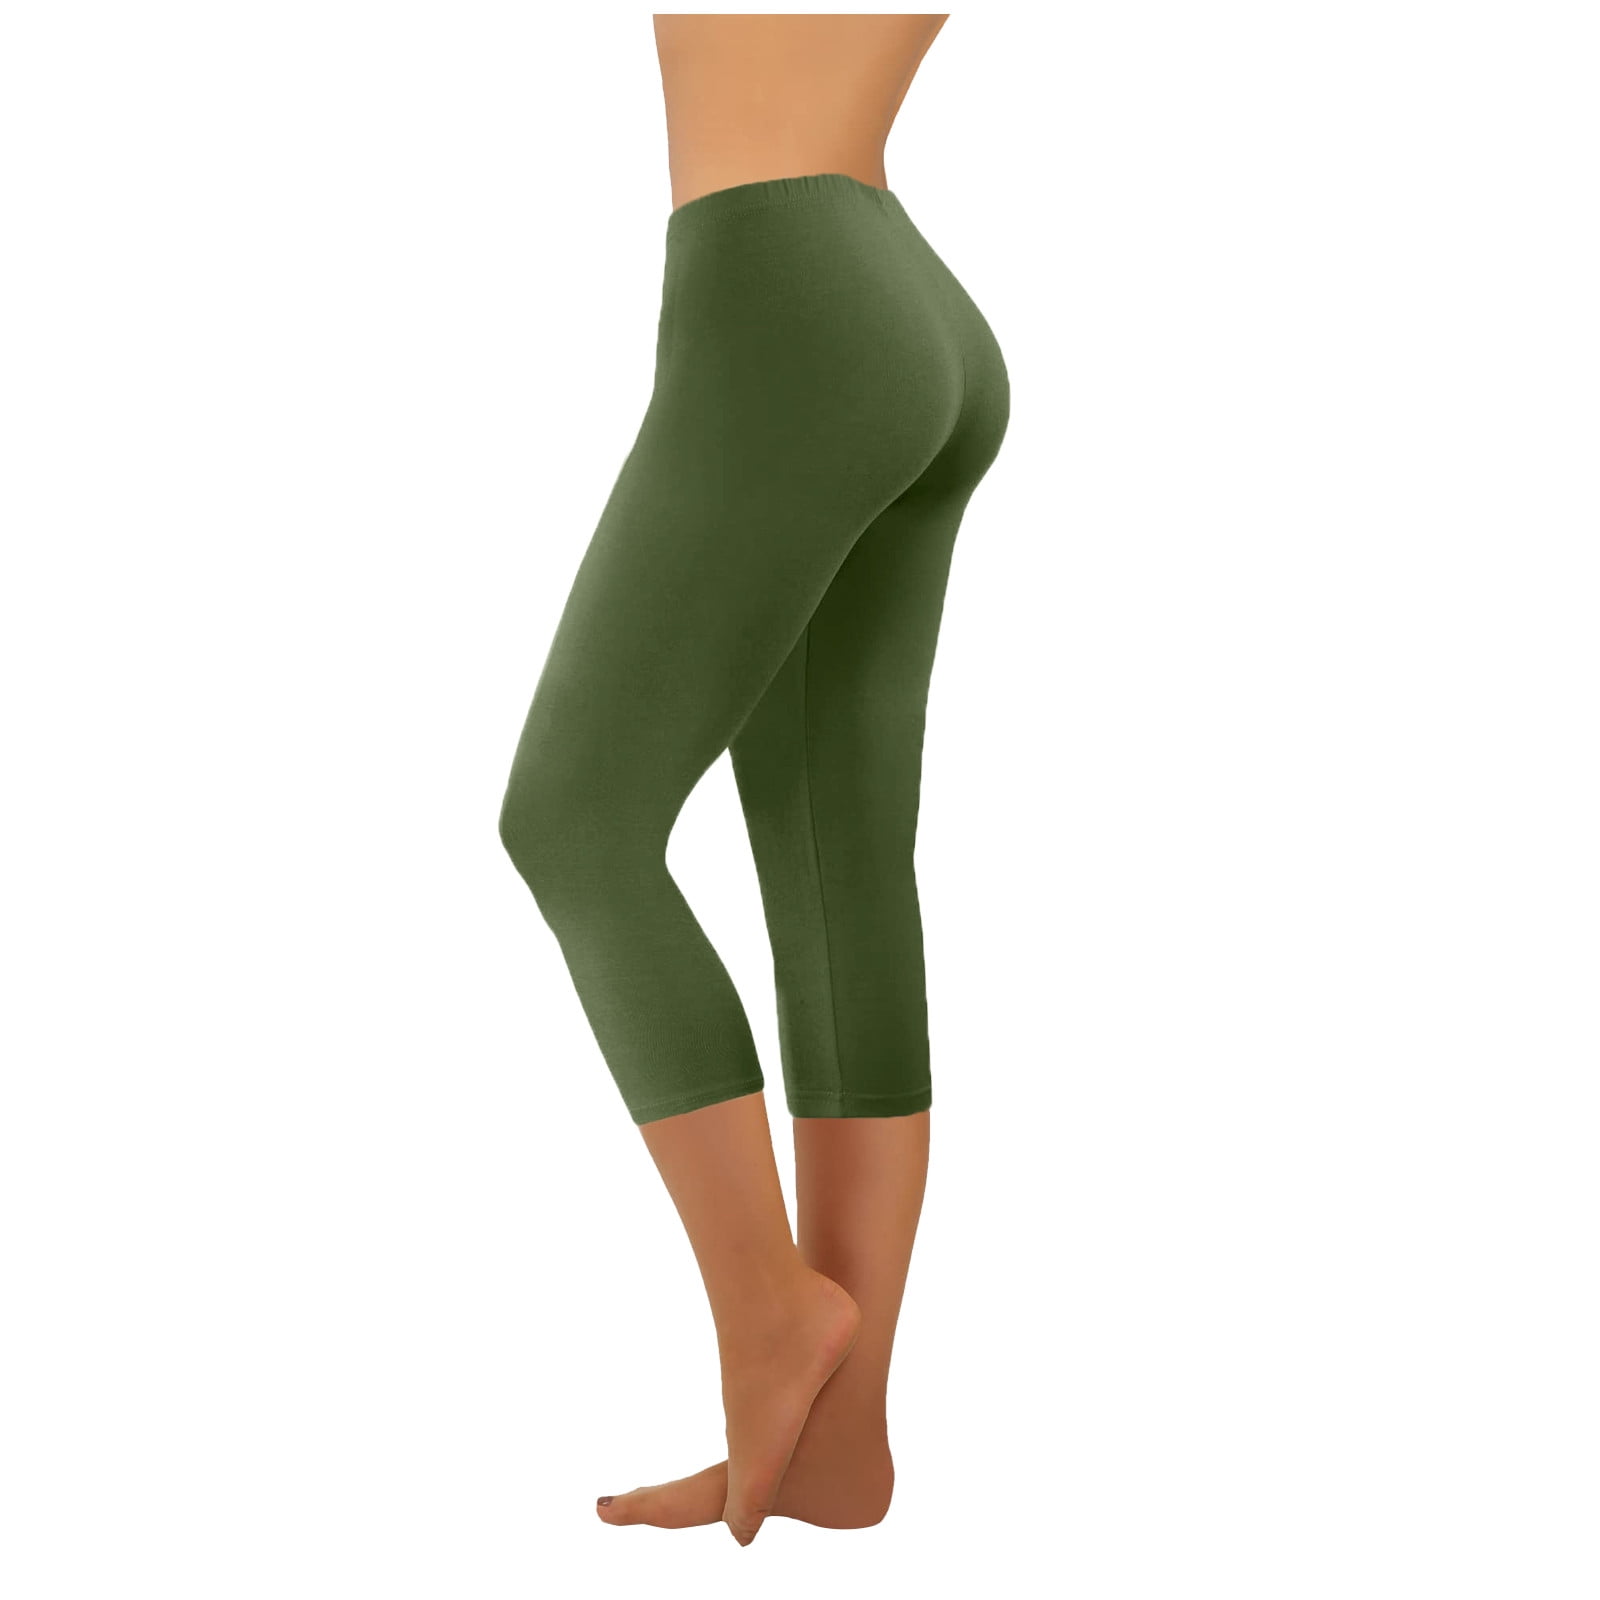 Buy Cactus Capri Leggings for Women Green Capris W/ All Over Print Cactus  Succulent Printed Capri Perfect for Running, Workouts, Yoga and Gym Online  in India 